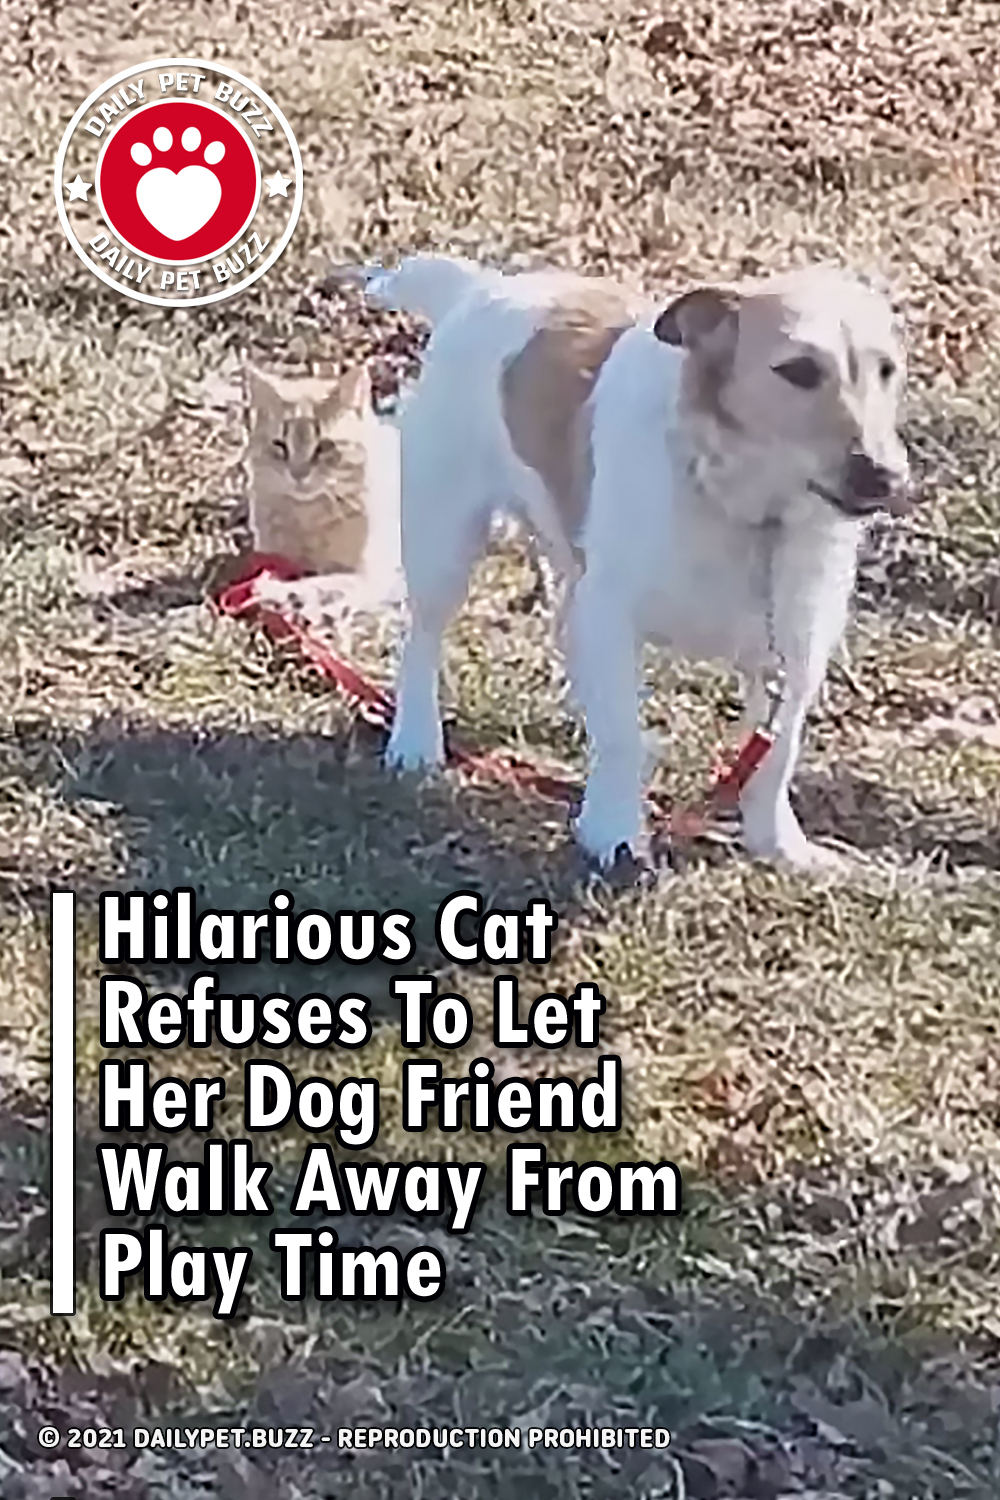 Hilarious Cat Refuses To Let Her Dog Friend Walk Away From Play Time